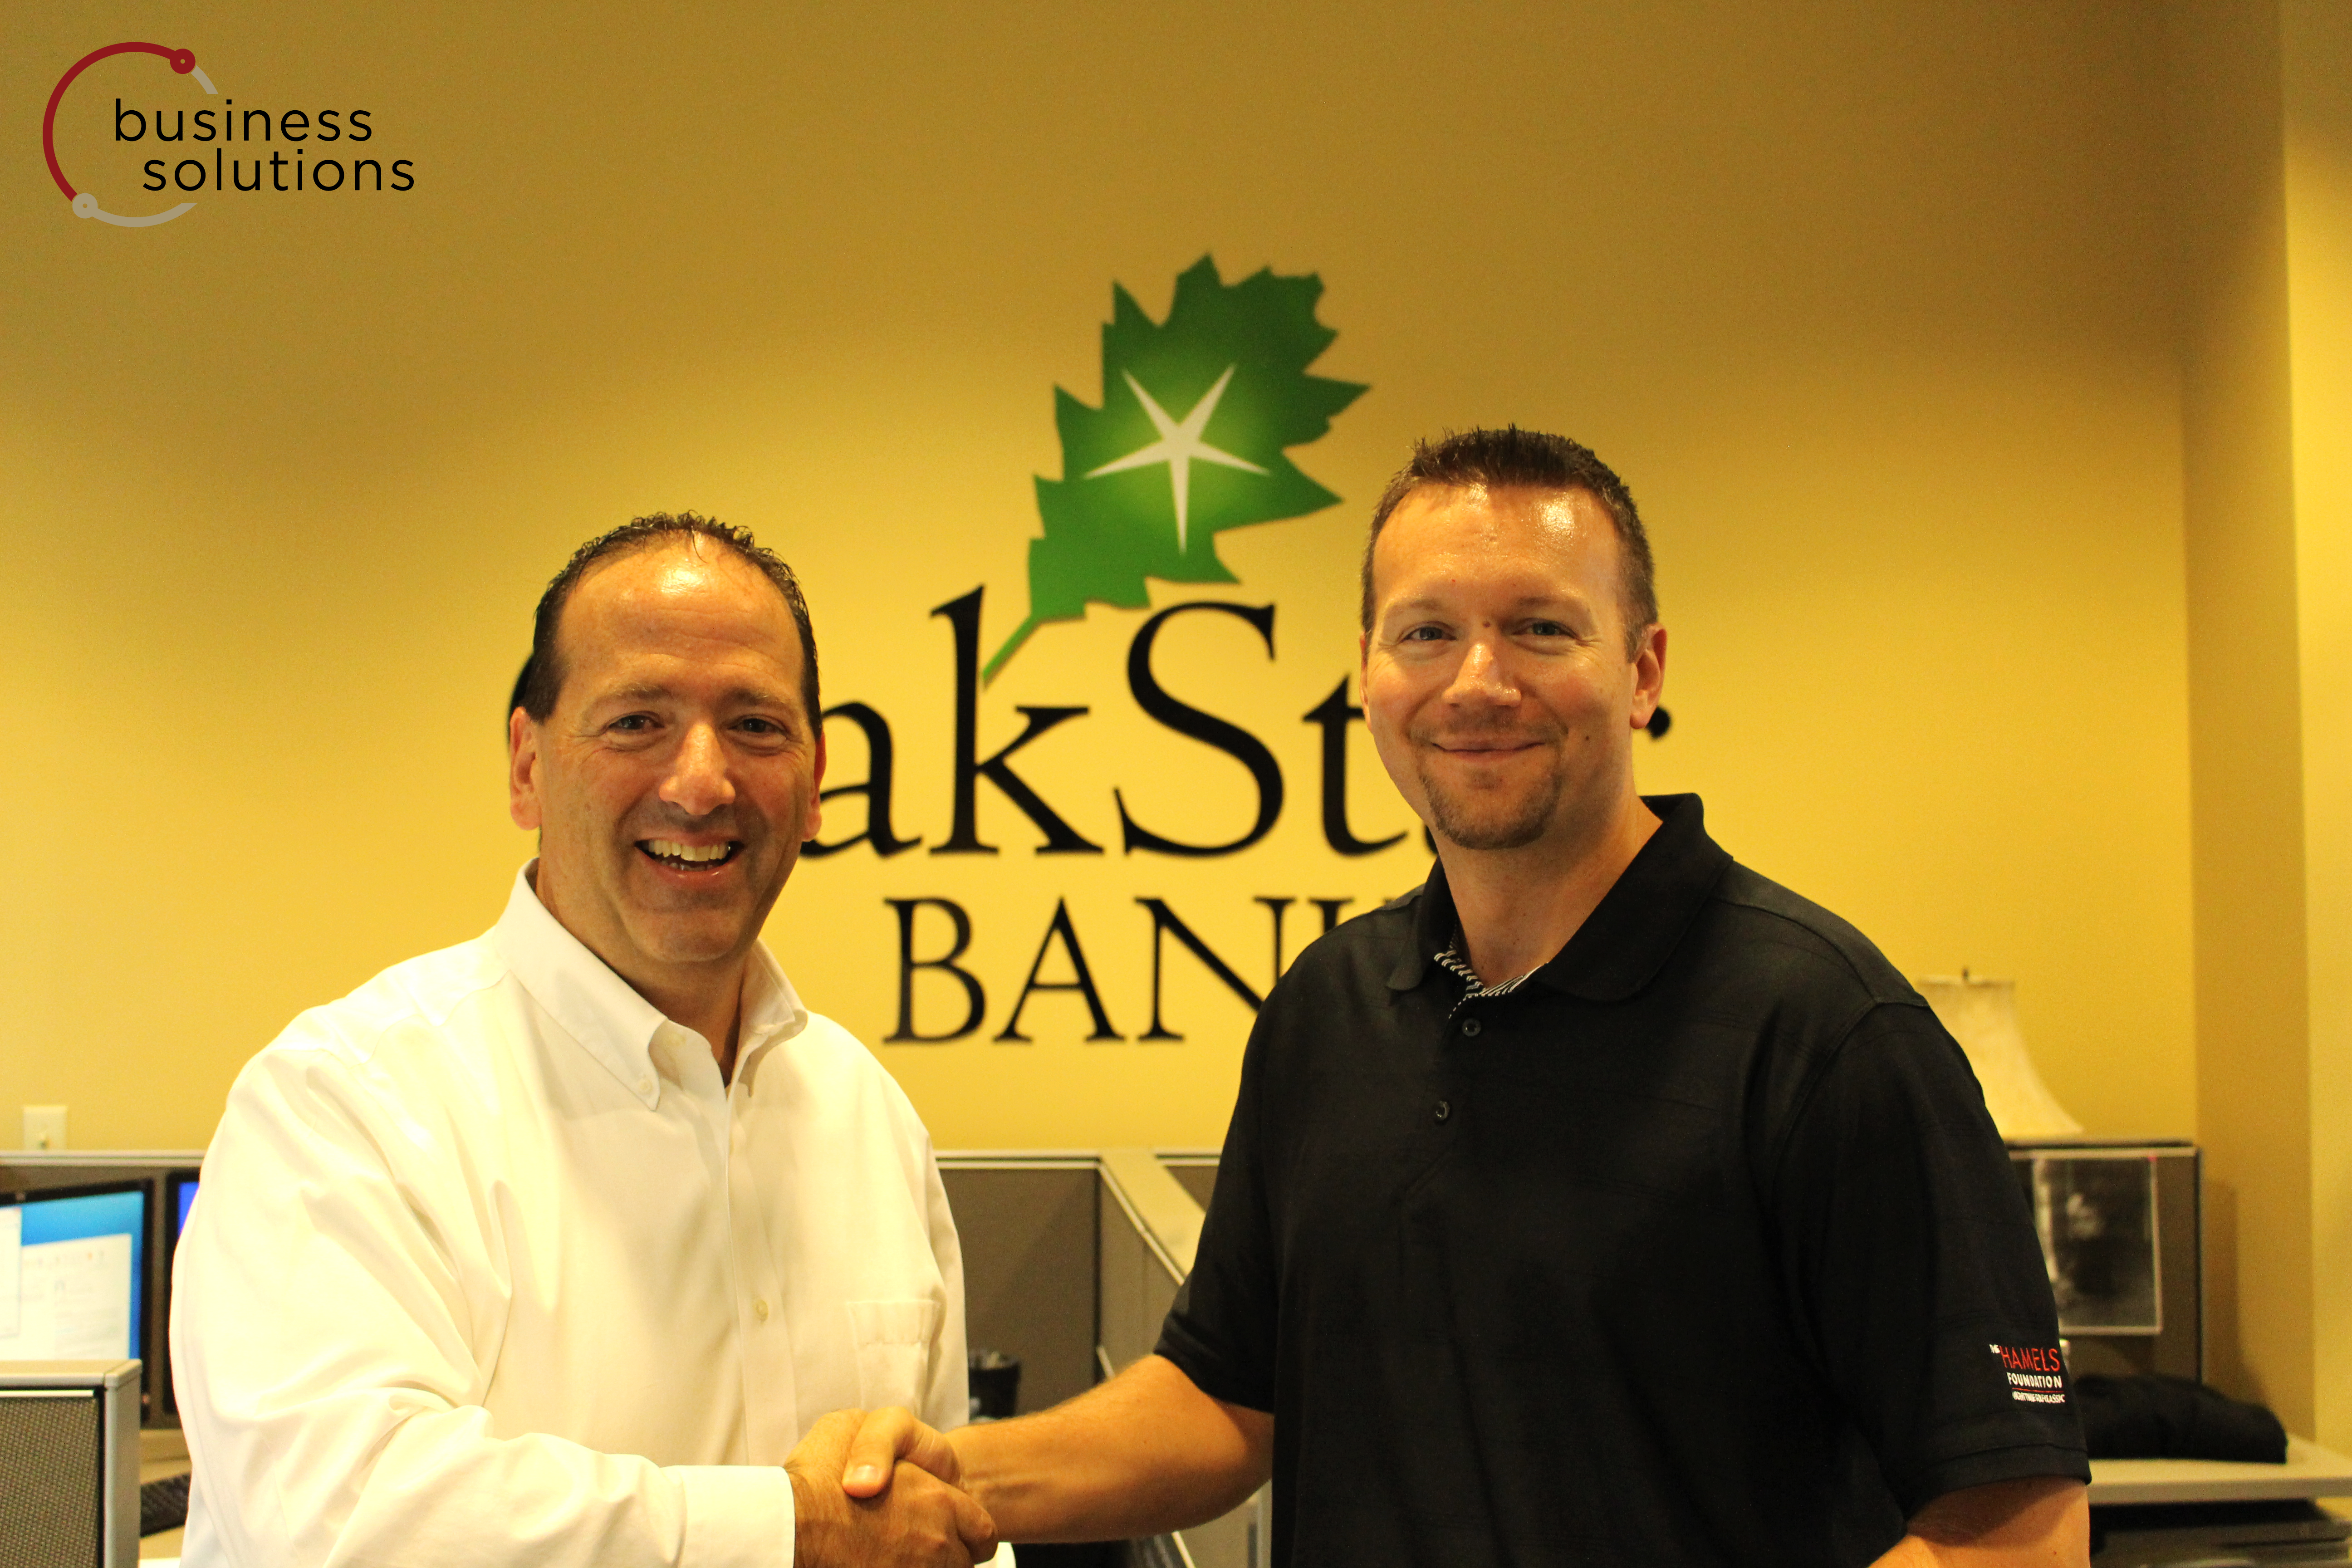 McFail poses with Business Solutions executive  Mike Lofaro after receiving his prize.